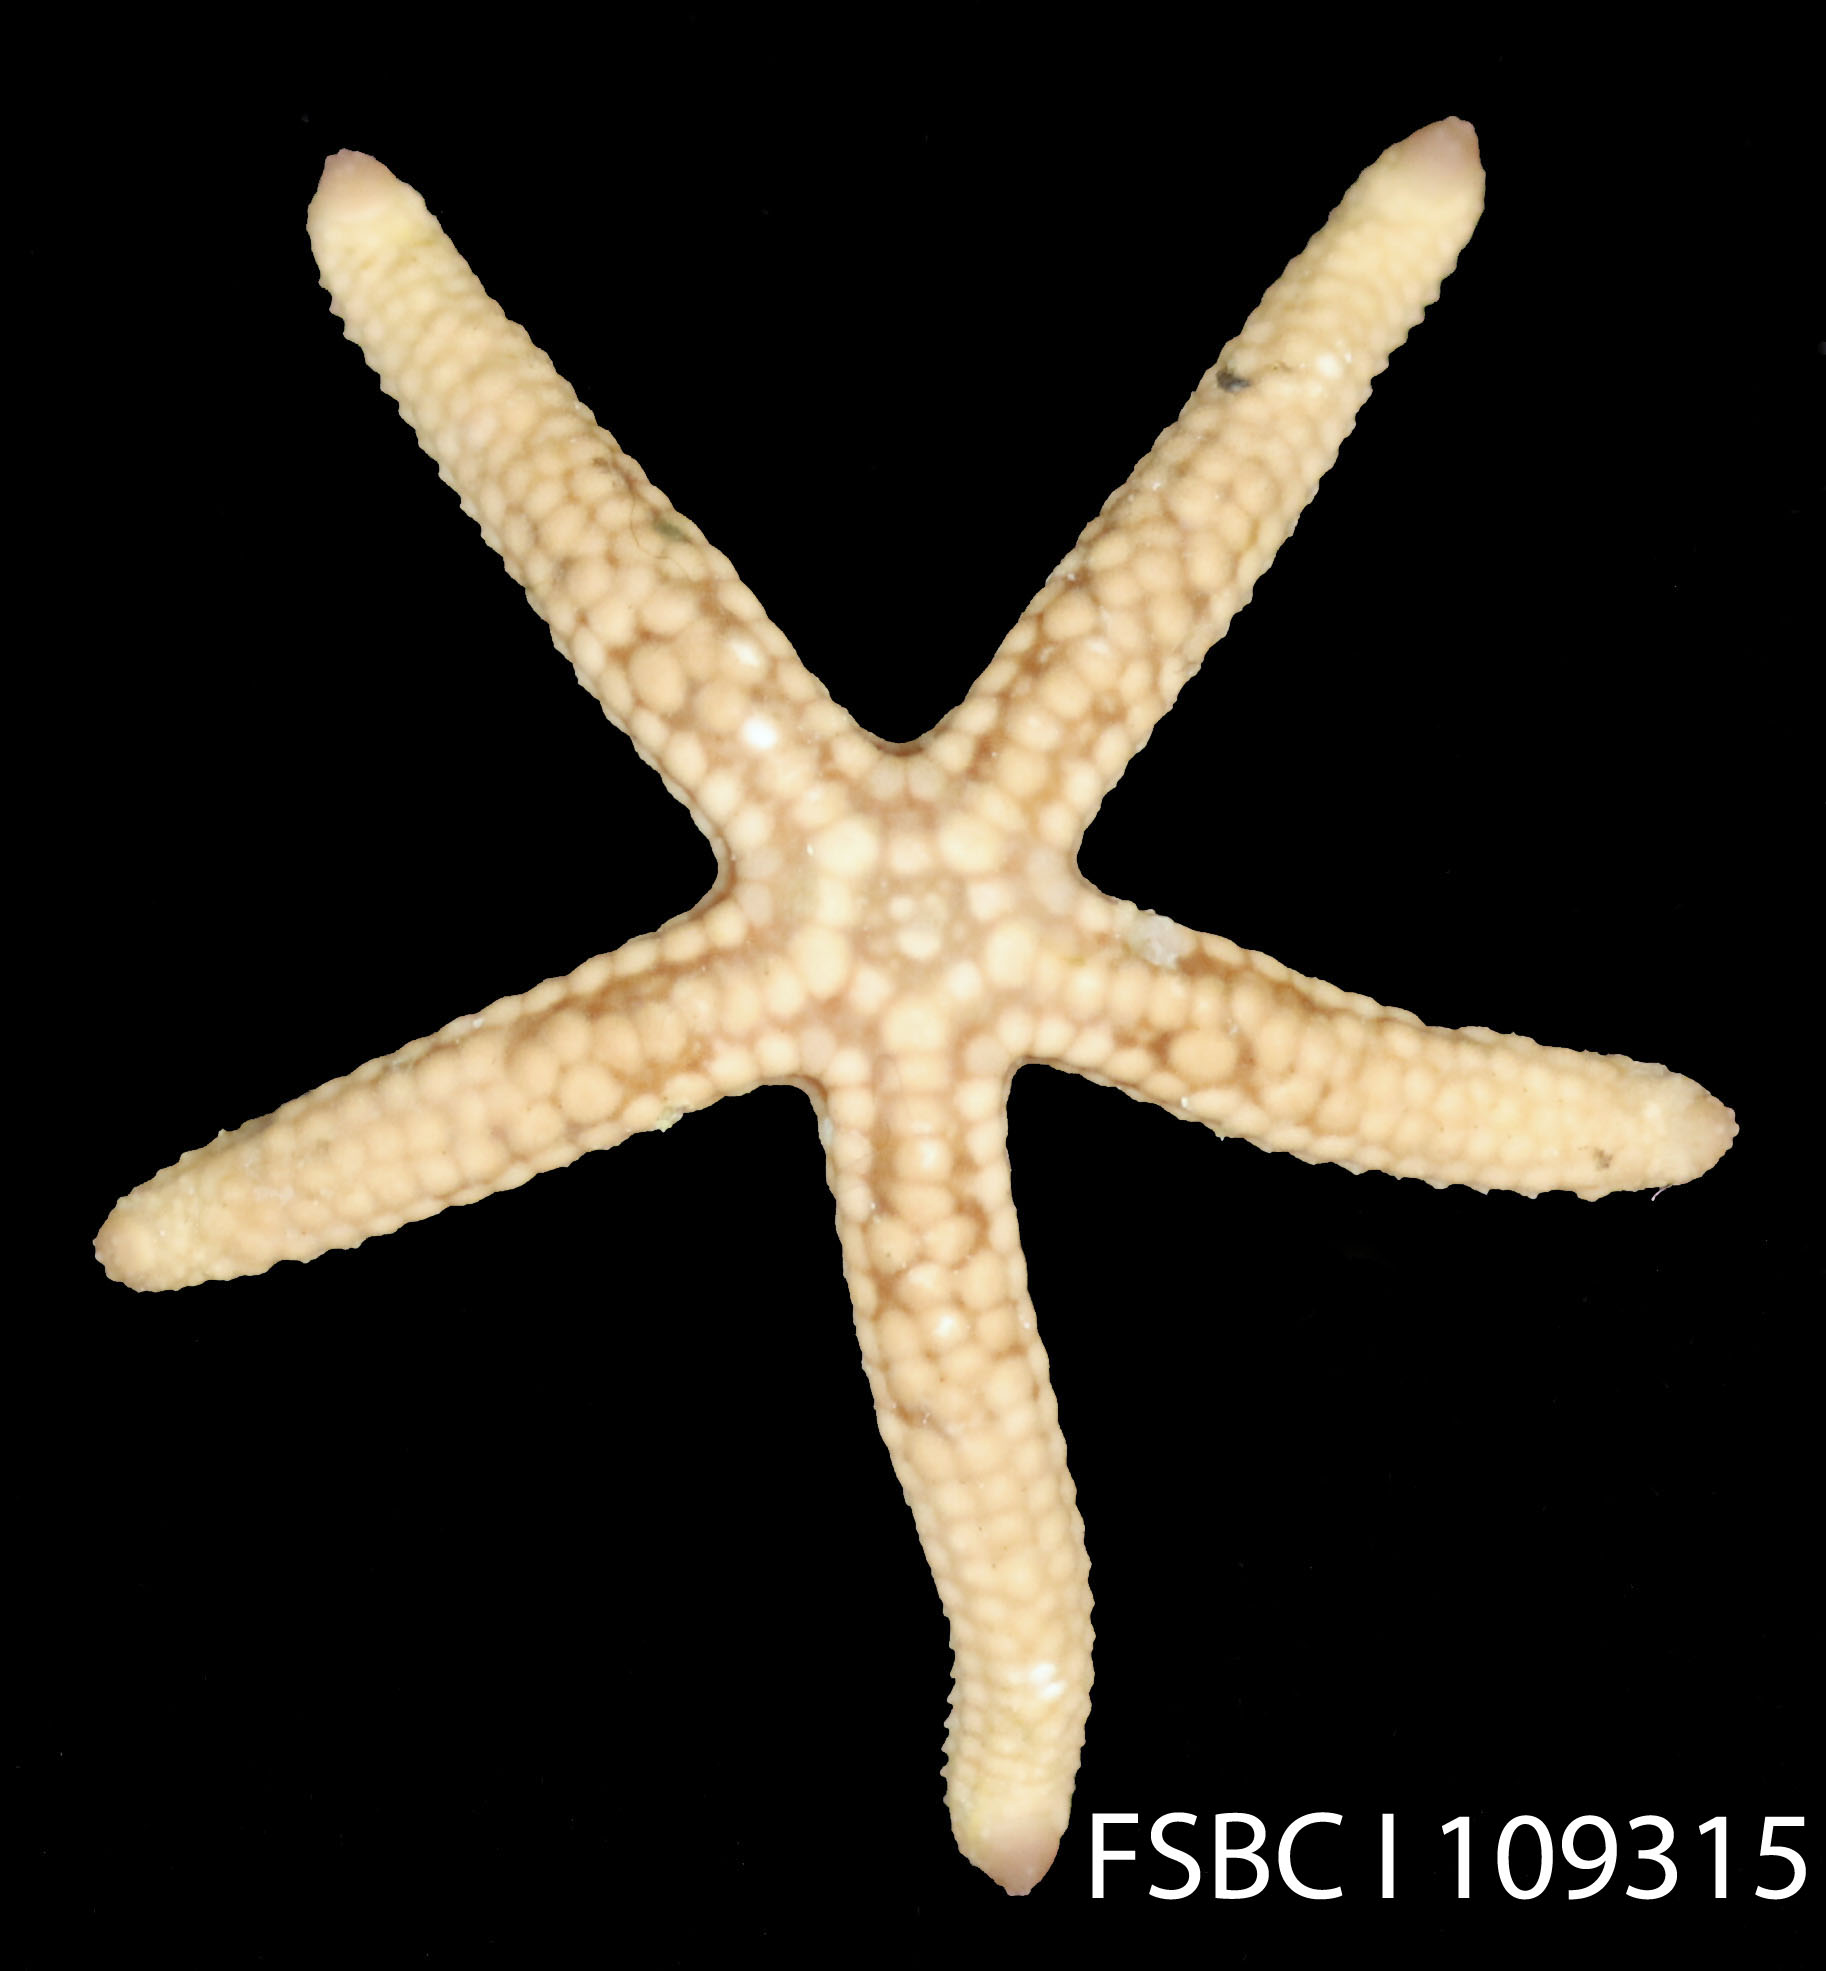 a starfish with large, white dots on its body